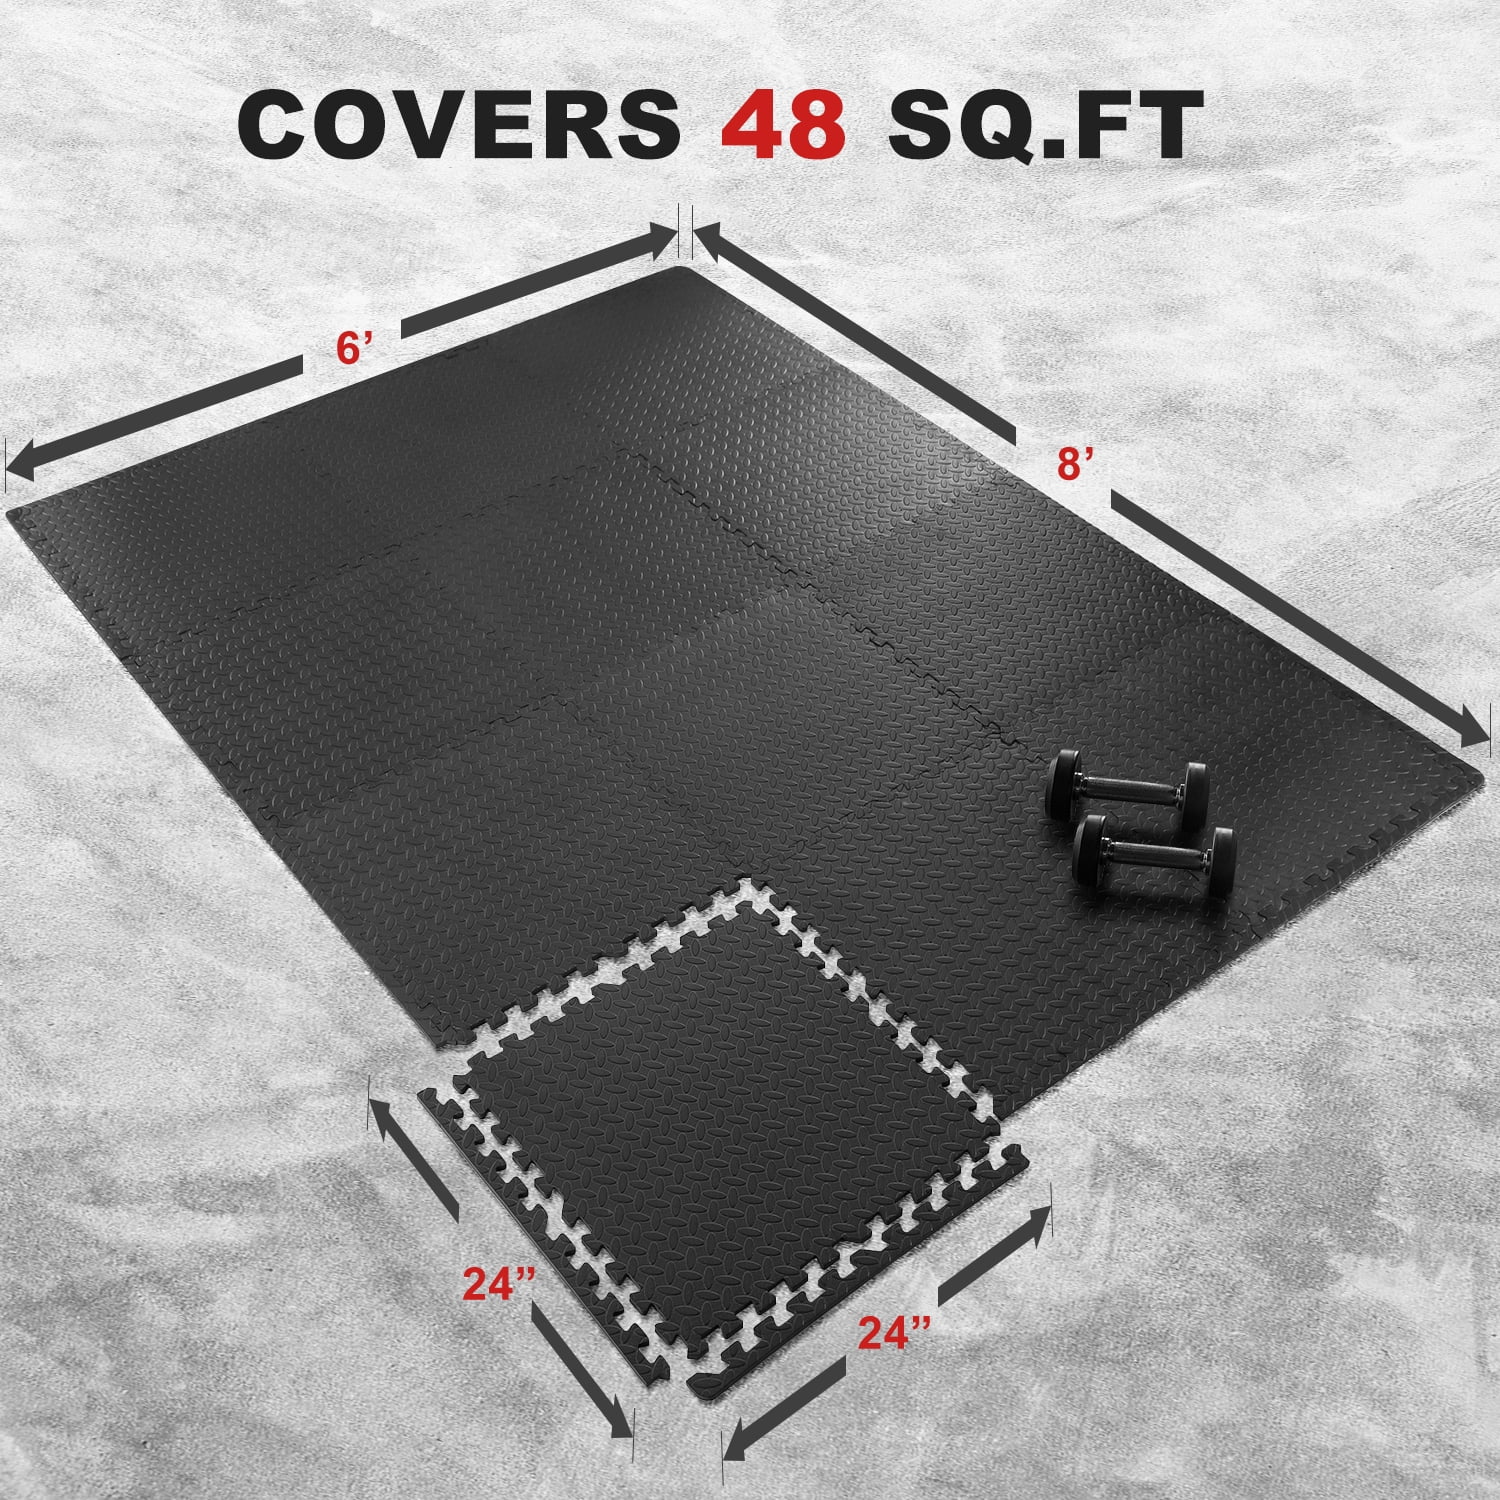 SciencePurchase 24 Square Feet / 6 Interlocking Foam Tiles Thick Exercise Mat - Soft Supportive Cushion for Exercising or Gym Equipment Floor Protection, Non-Skid